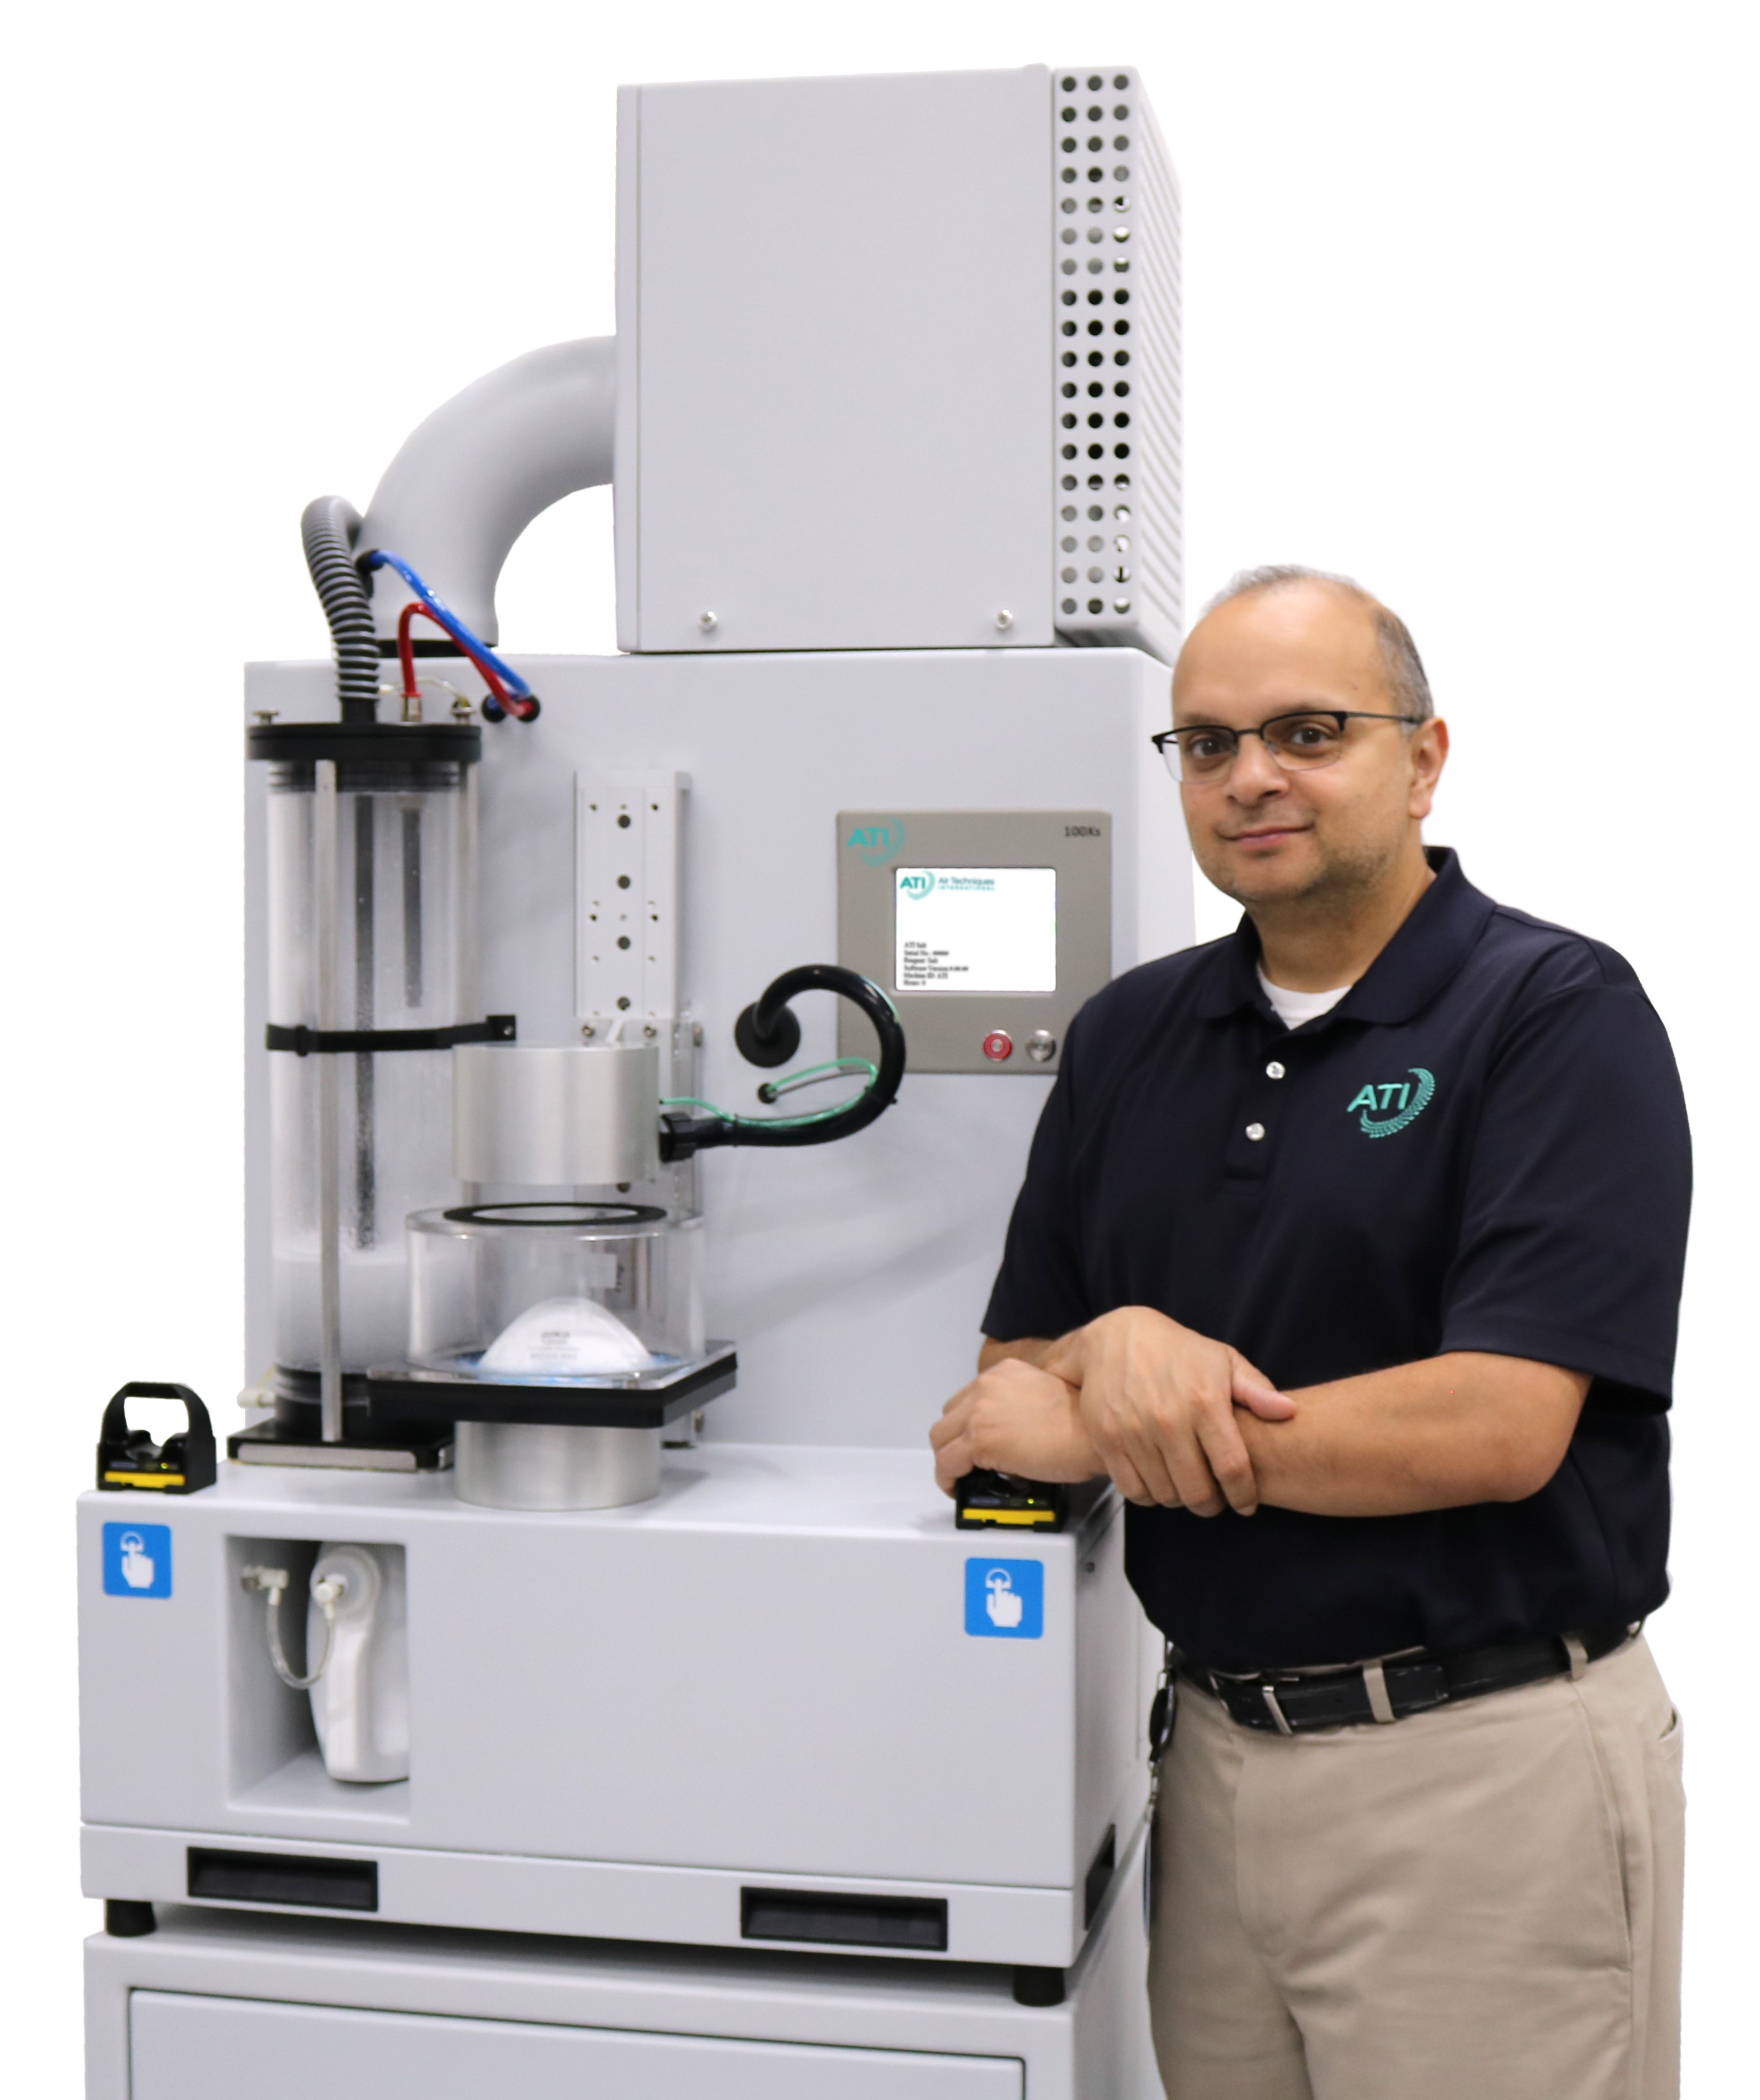 ATI's global product manager, Gautam Patel with the 100X automated filter tester and mask test adapter.